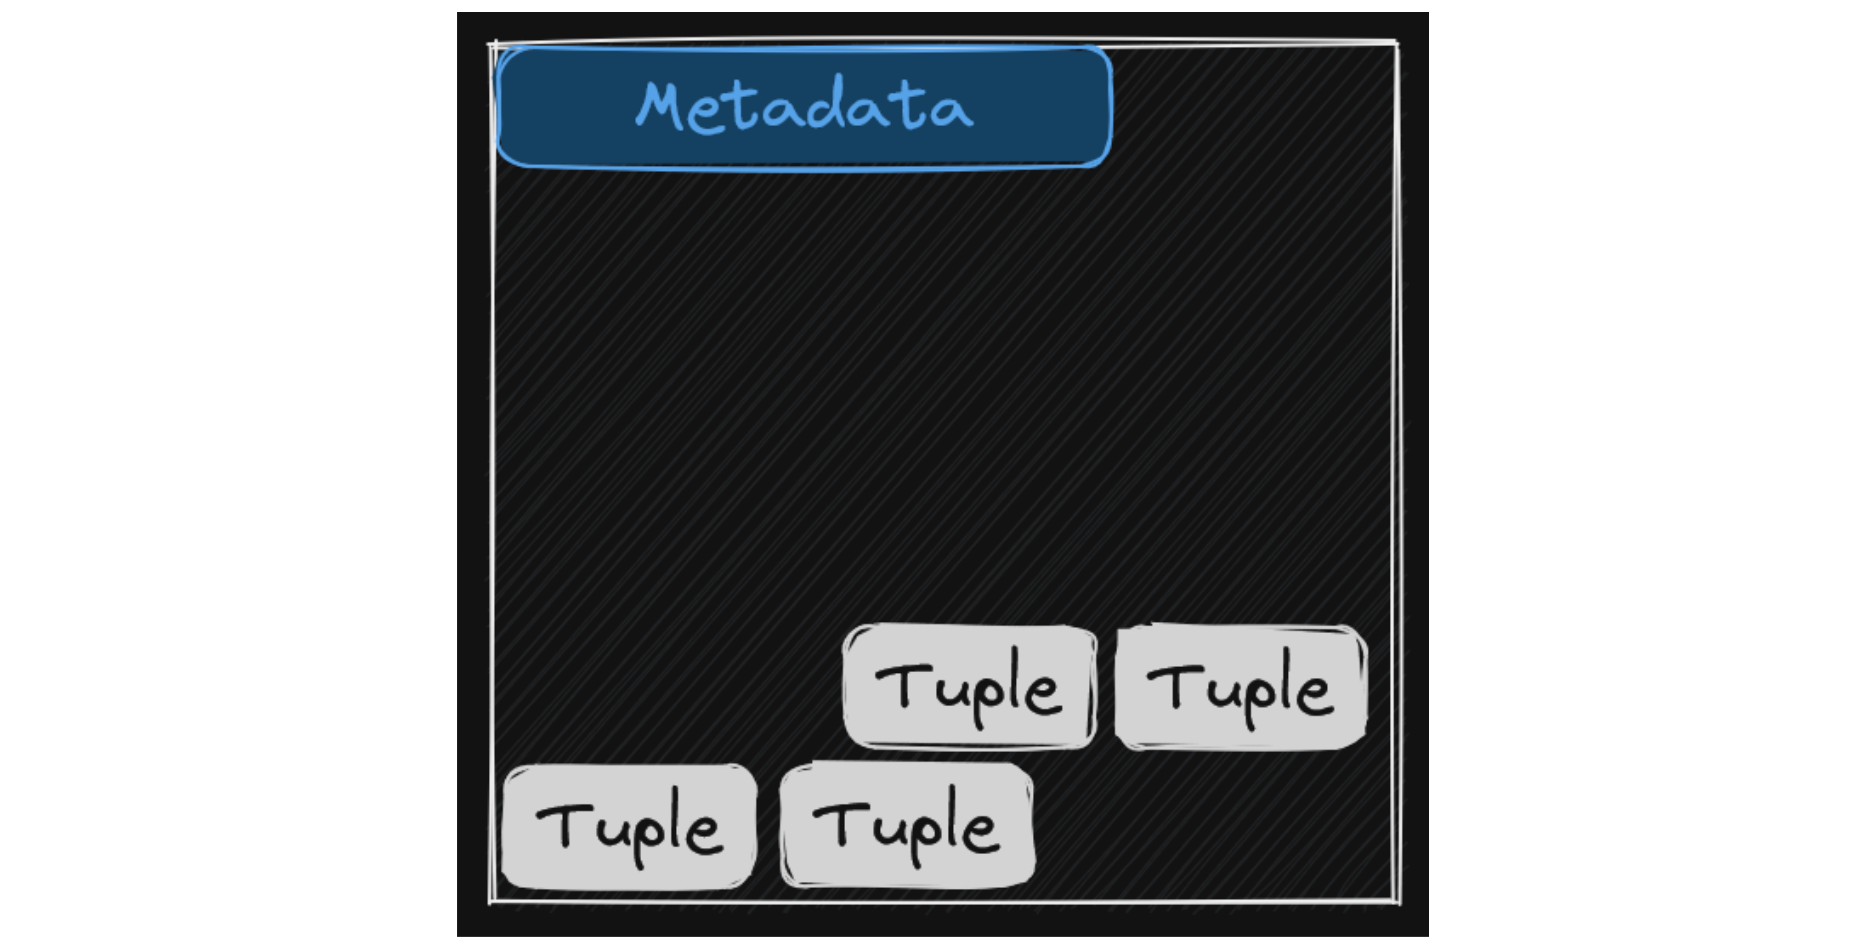 A simple representation of a PostgreSQL page containing metadata about the page and tuples stored in the page